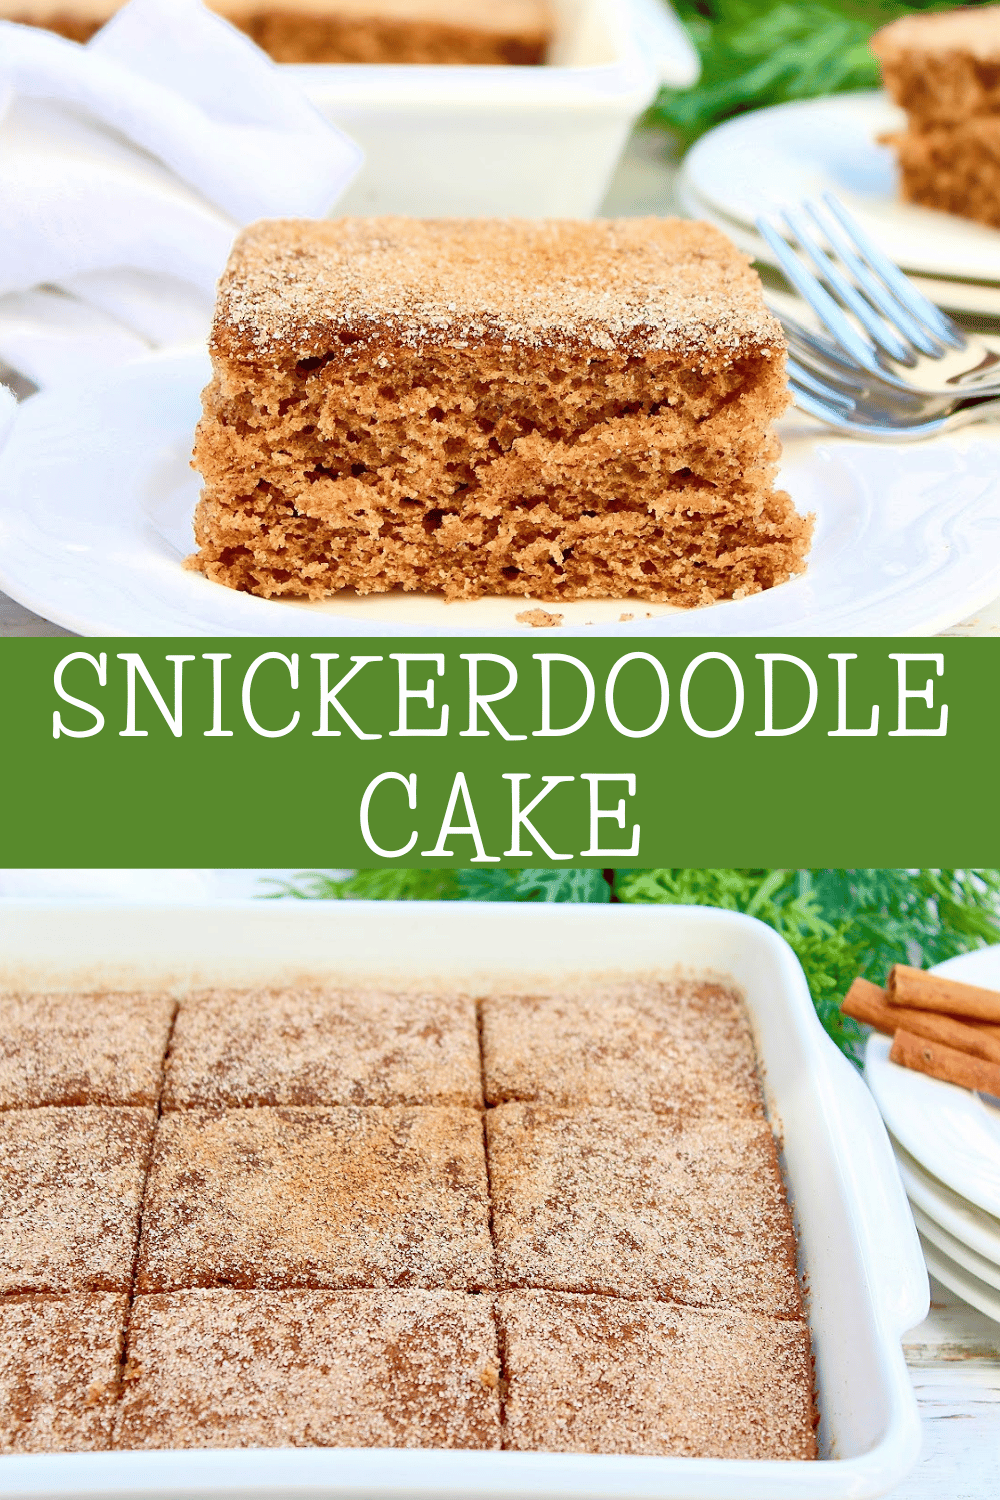 Snickerdoodle Cake ~ All the sweet cinnamon flavor of snickerdoodle cookies in a light and easy cake! Perfect for the holidays! via @thiswifecooks